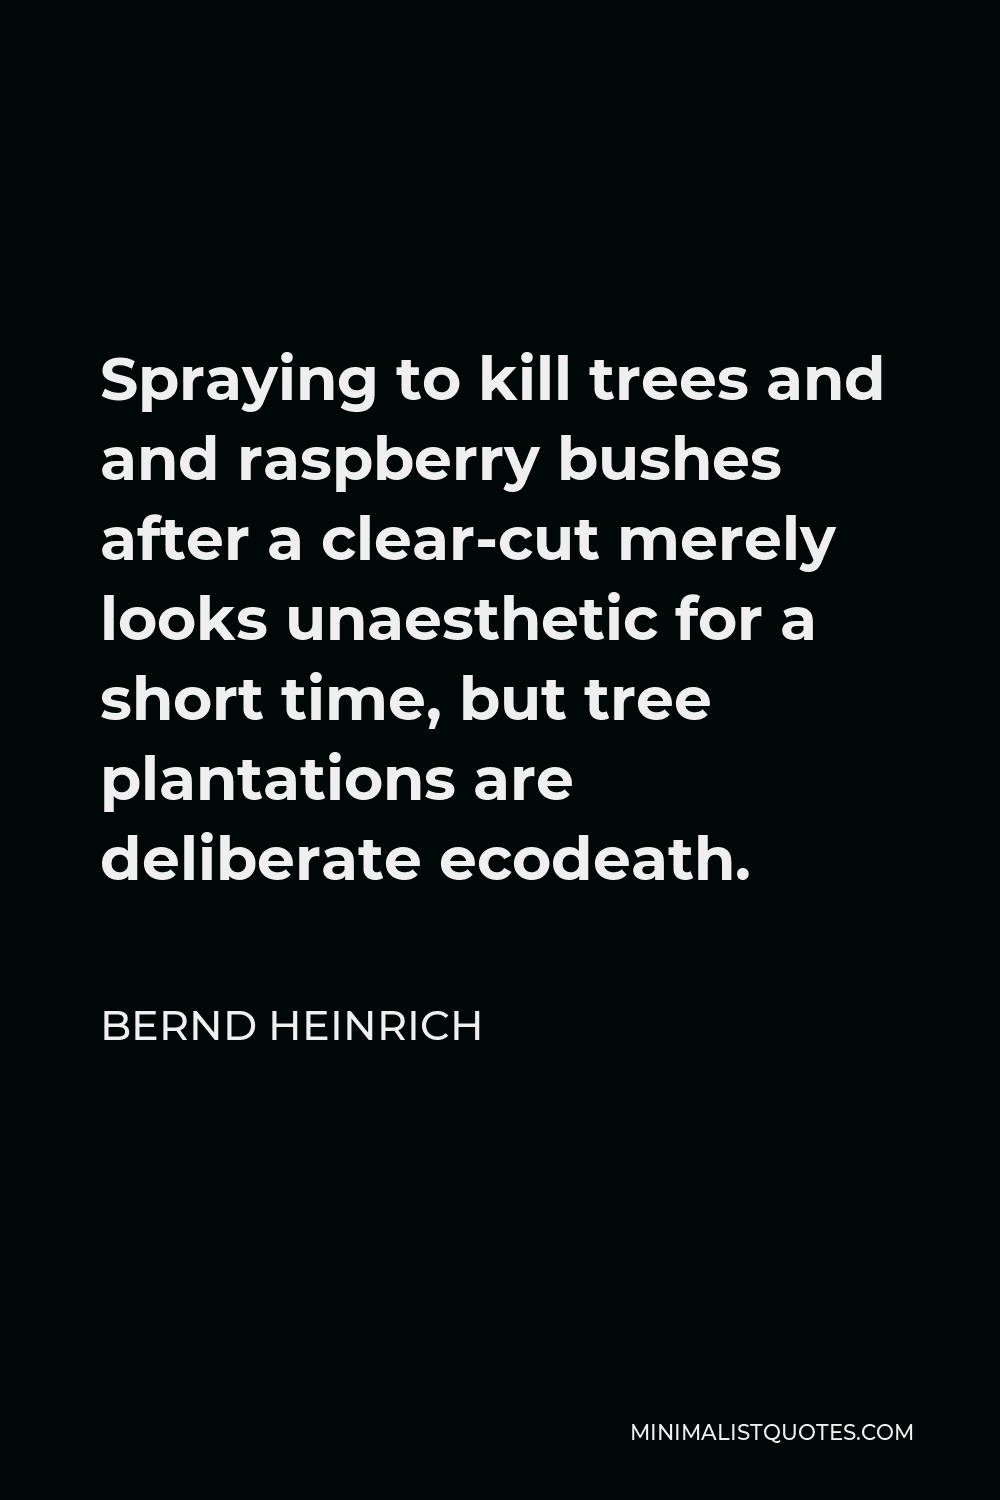 Bernd Heinrich Quote - Spraying to kill trees and and raspberry bushes after a clear-cut merely looks unaesthetic for a short time, but tree plantations are deliberate ecodeath.